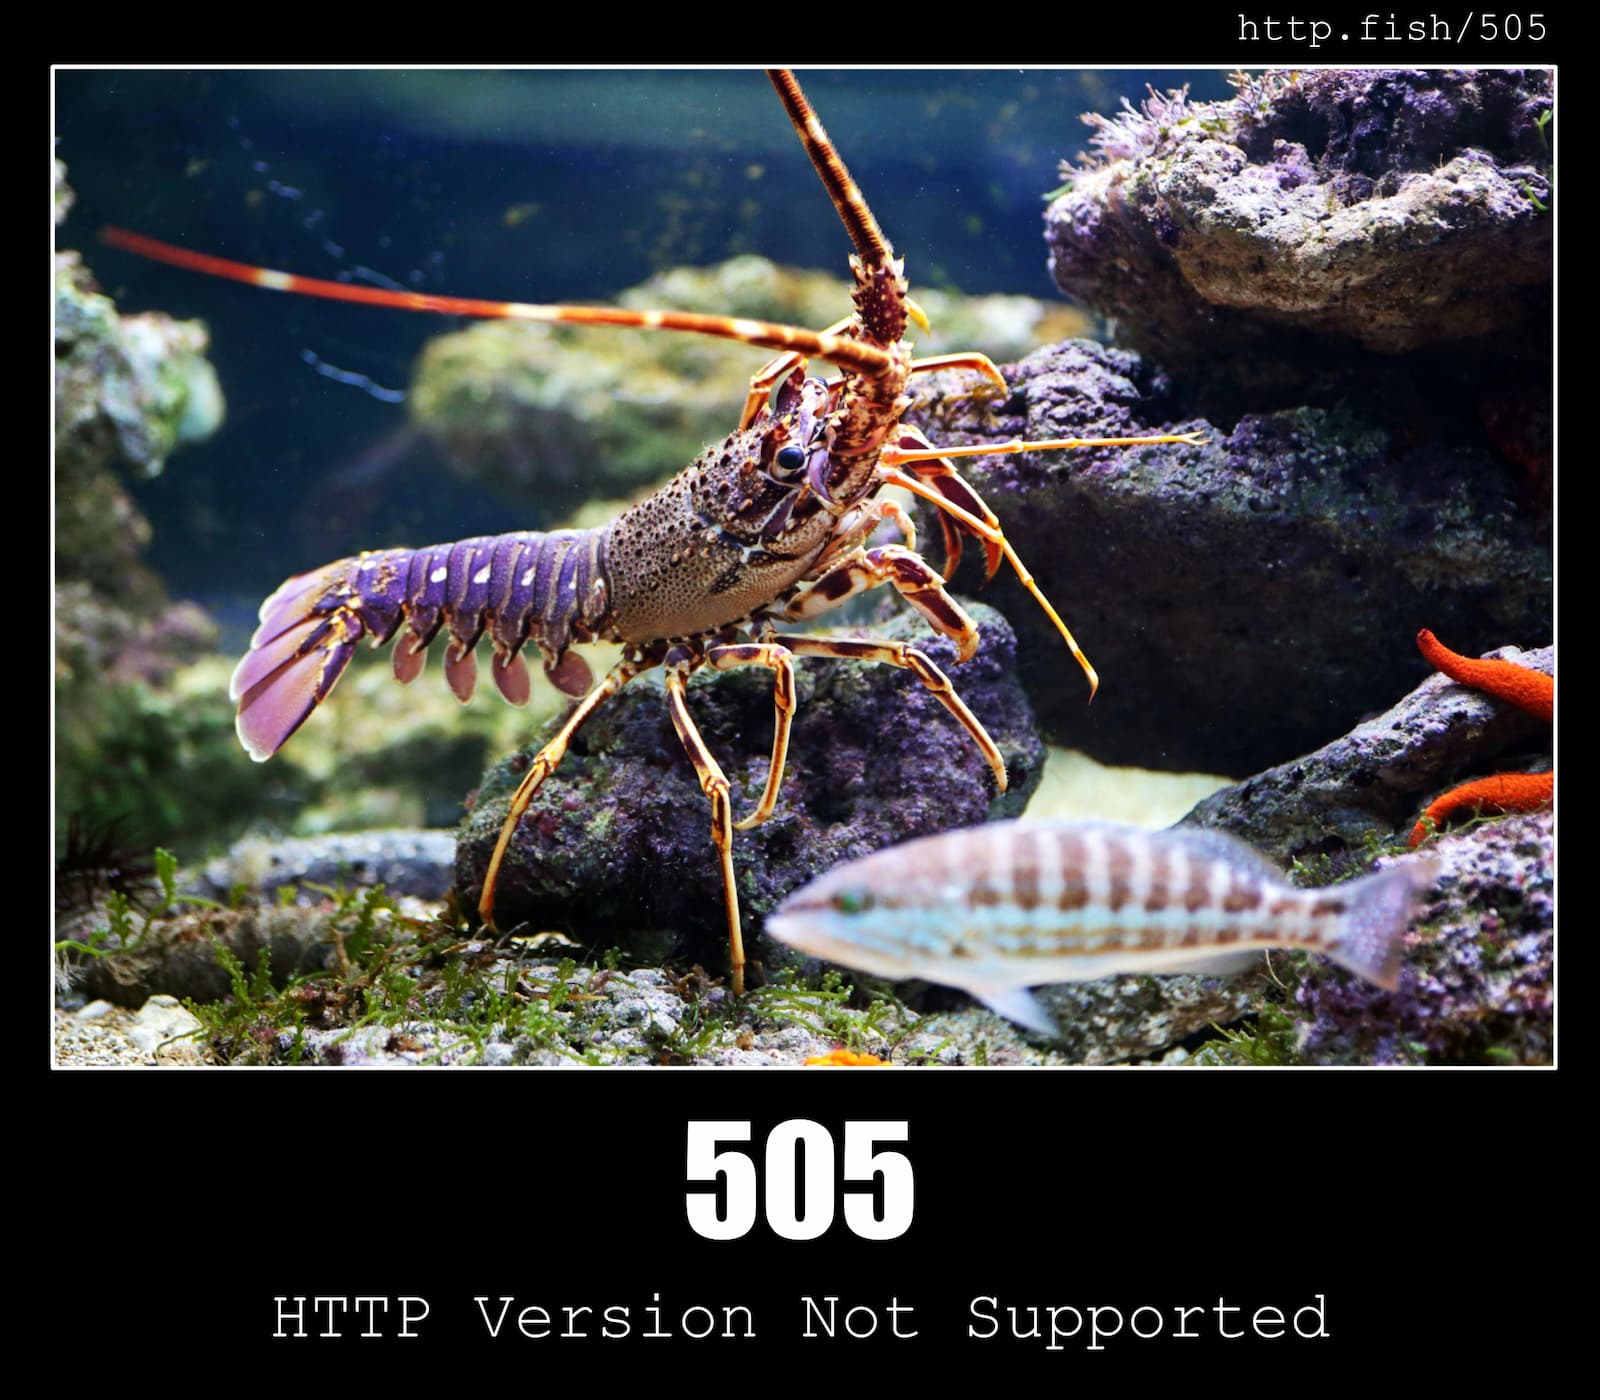 HTTP Status Code 505 HTTP Version Not Supported & Fish